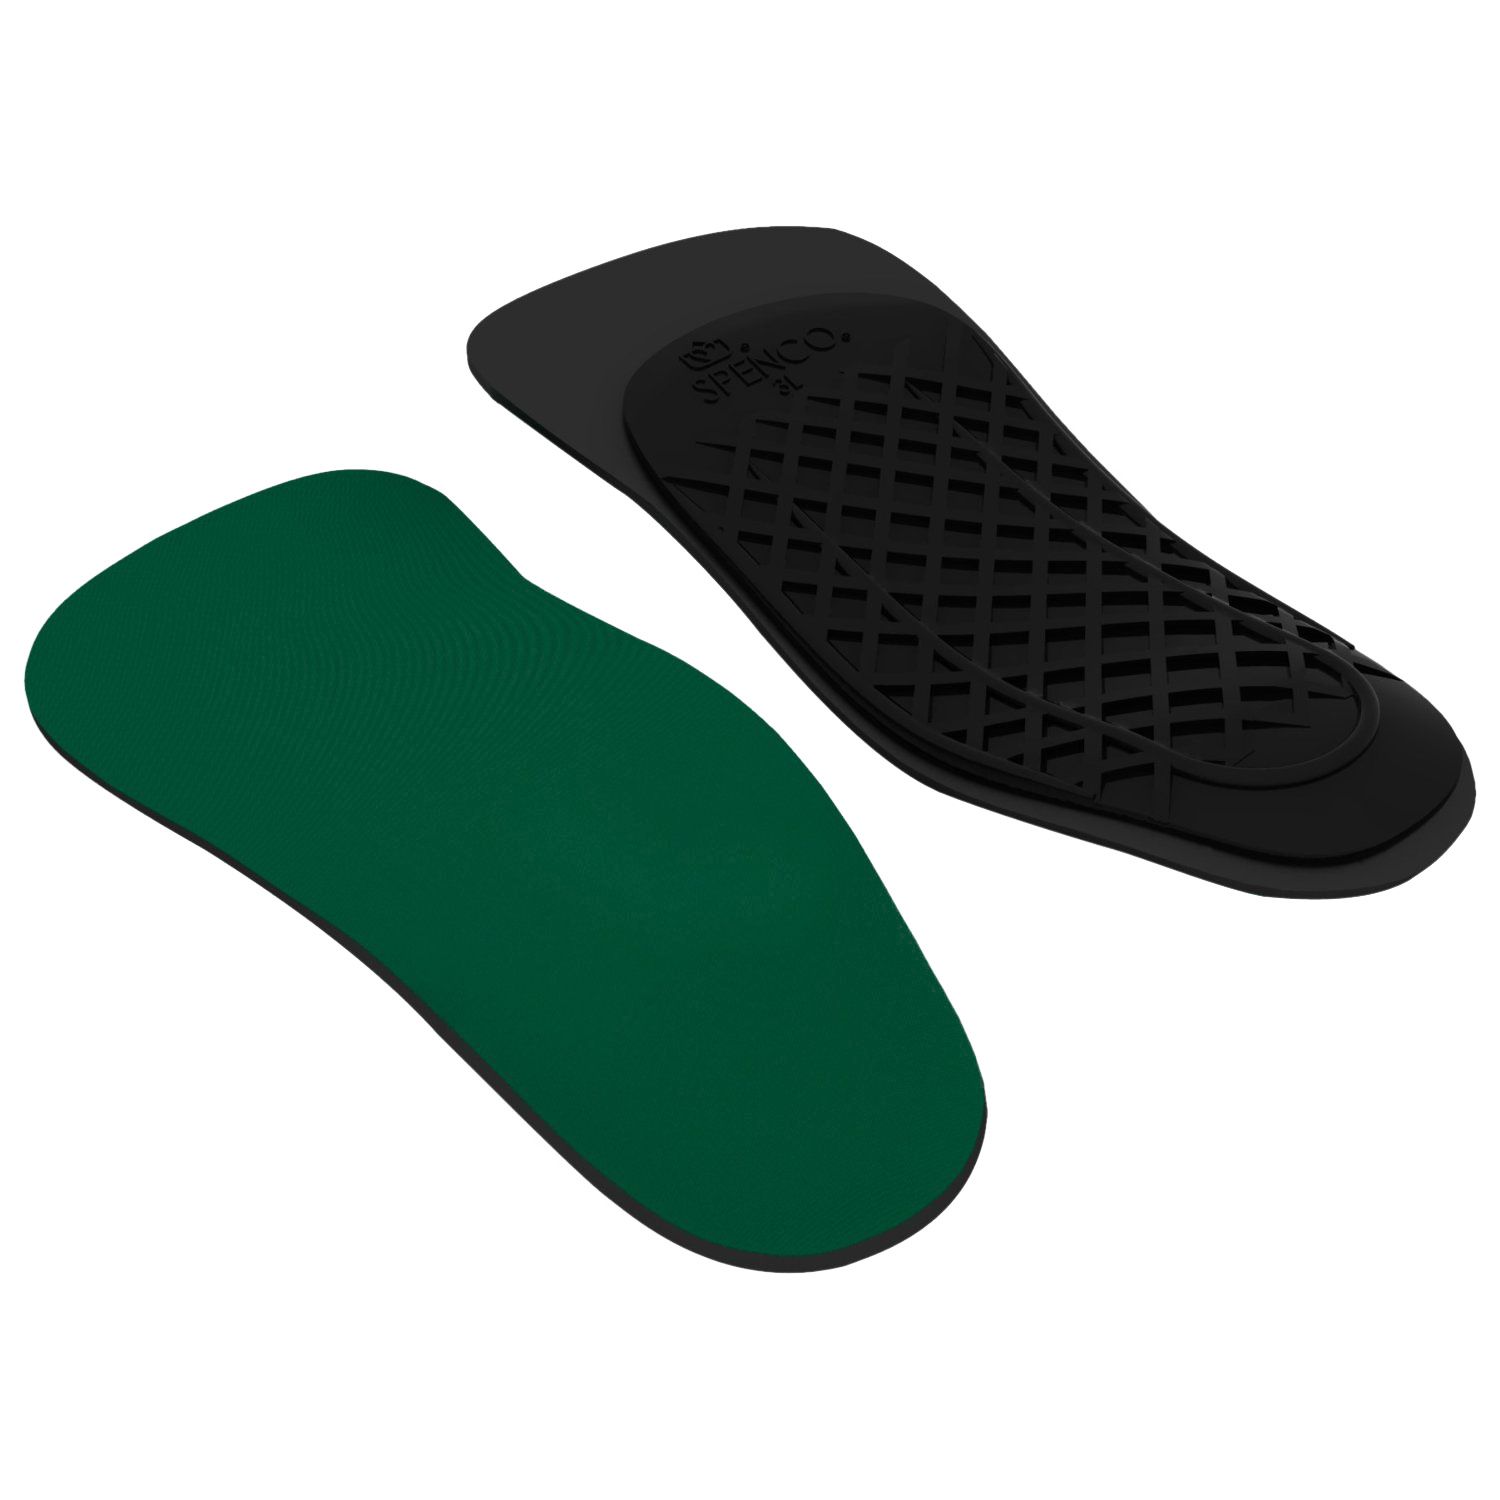 New Pair Spenco Arch Cushions 3/4 or Full Length Cushion Insoles 